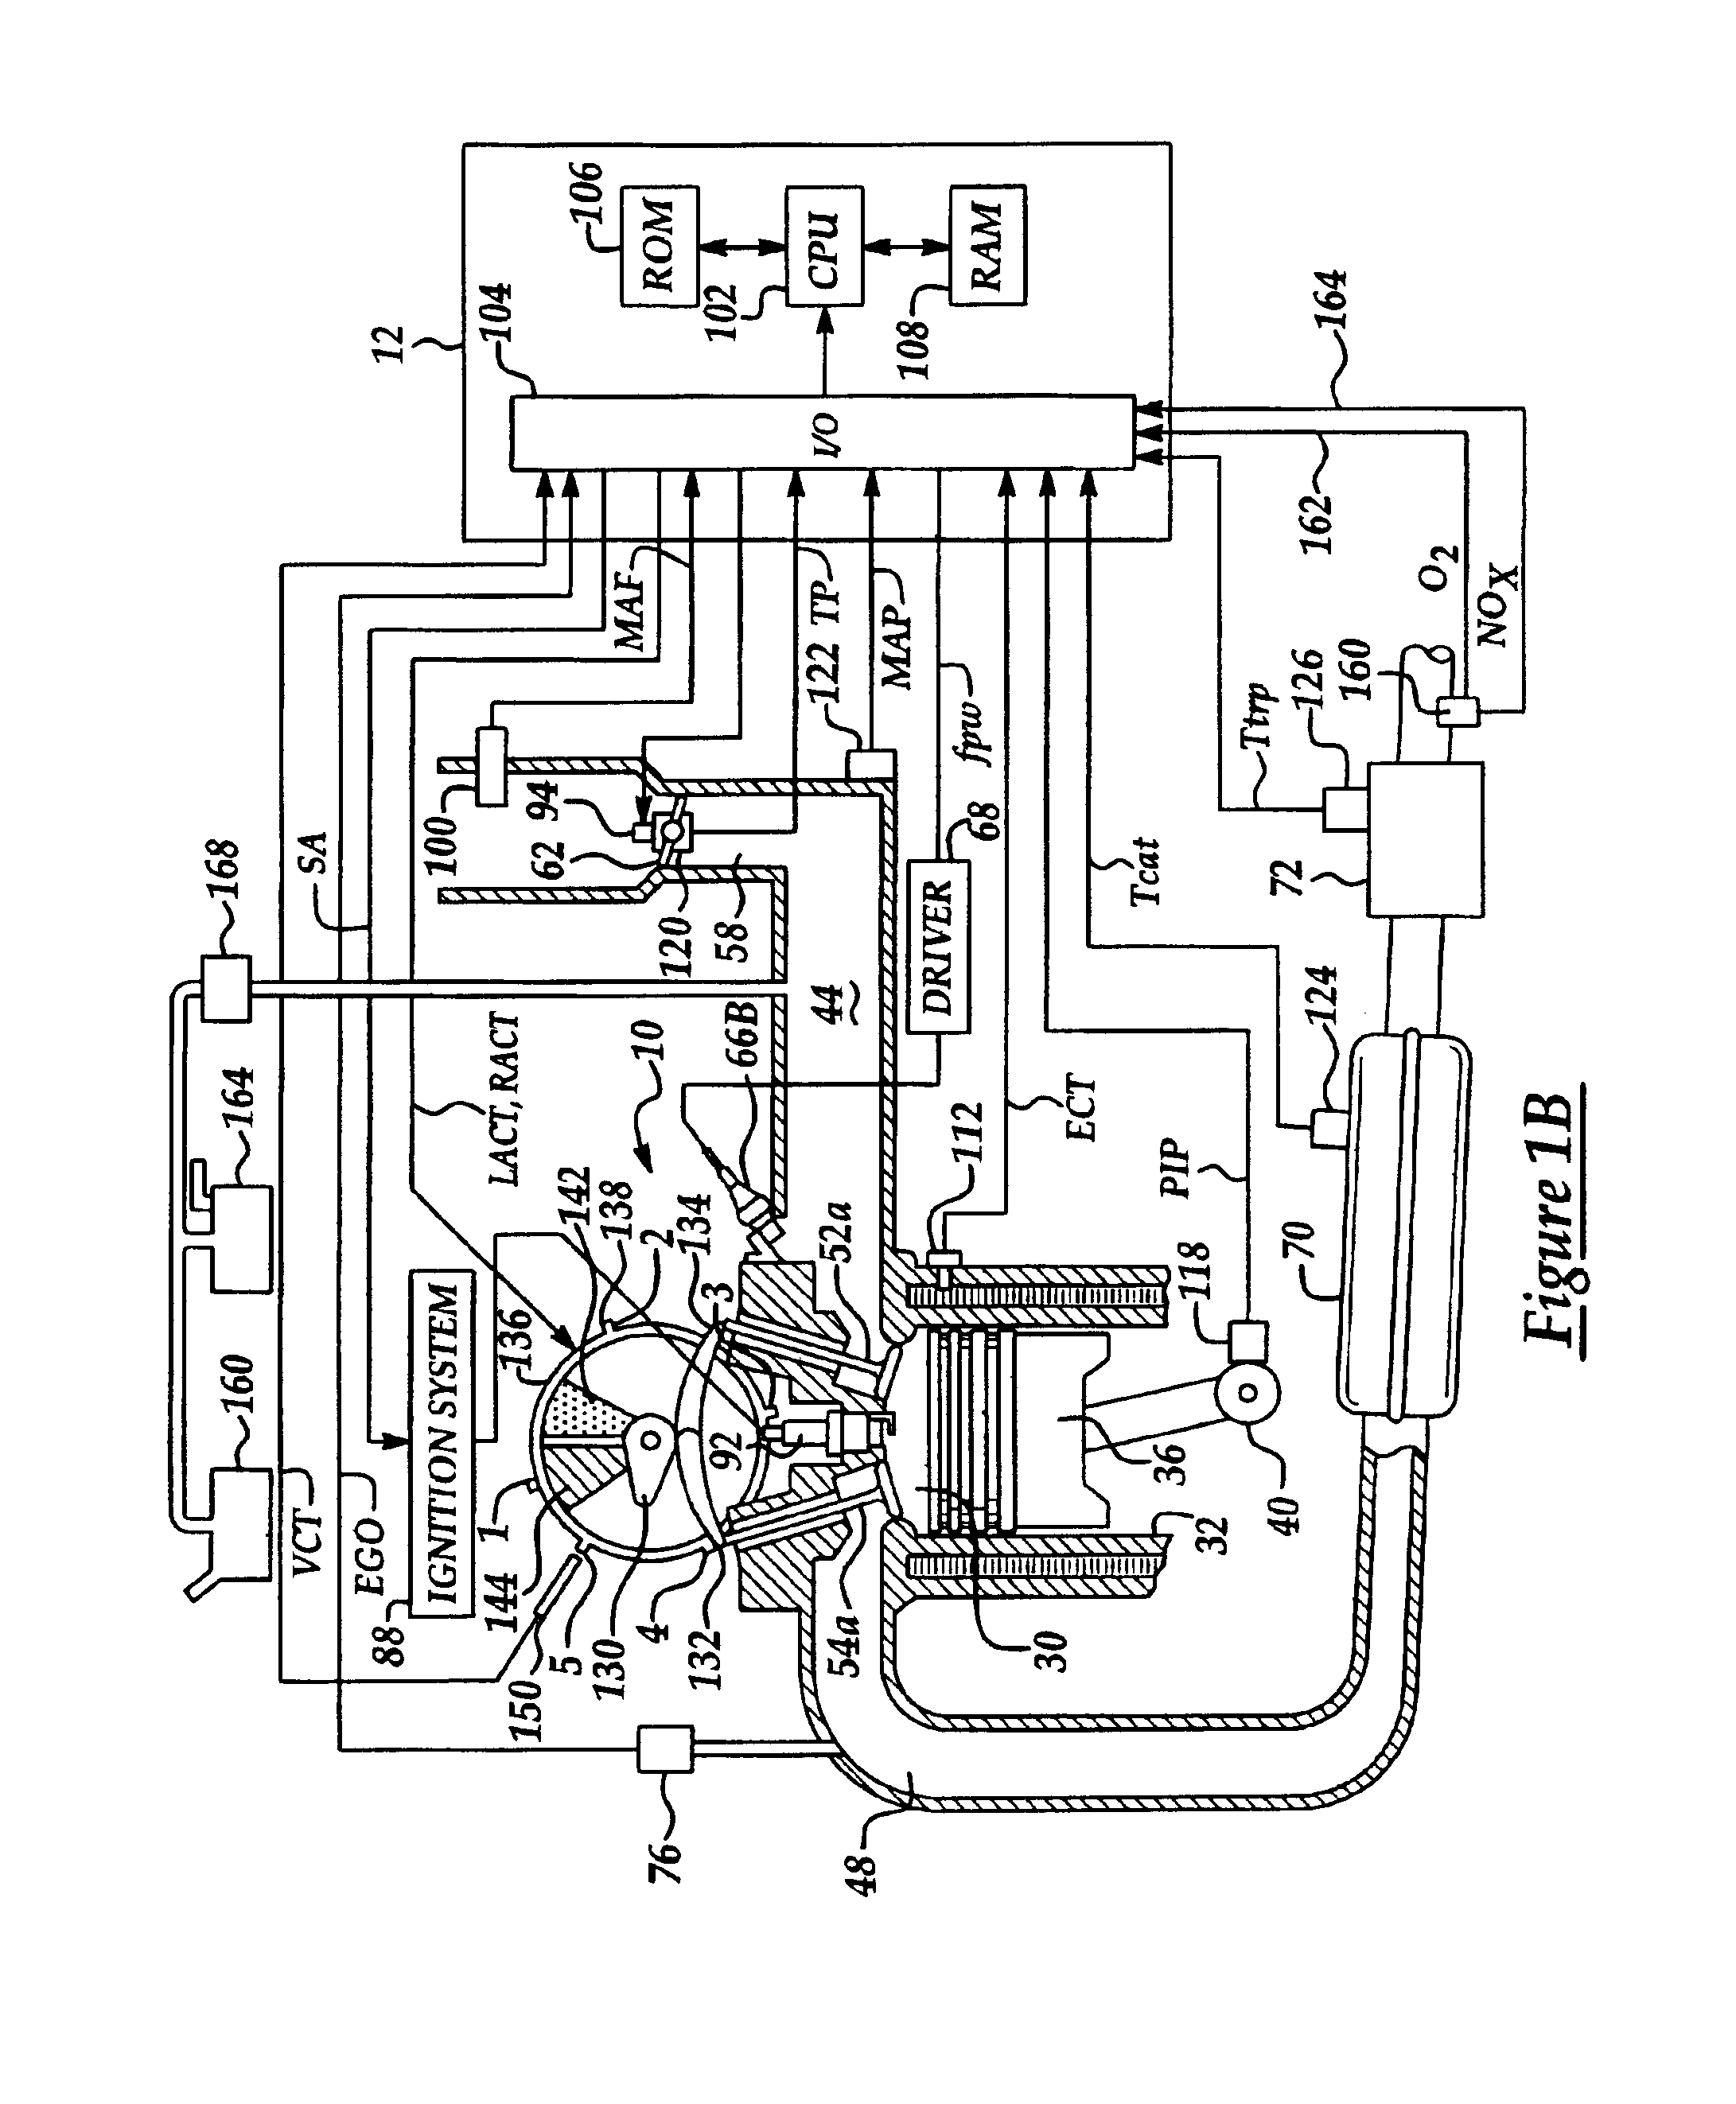 Idle speed control for lean burn engine with variable-displacement-like characteristic